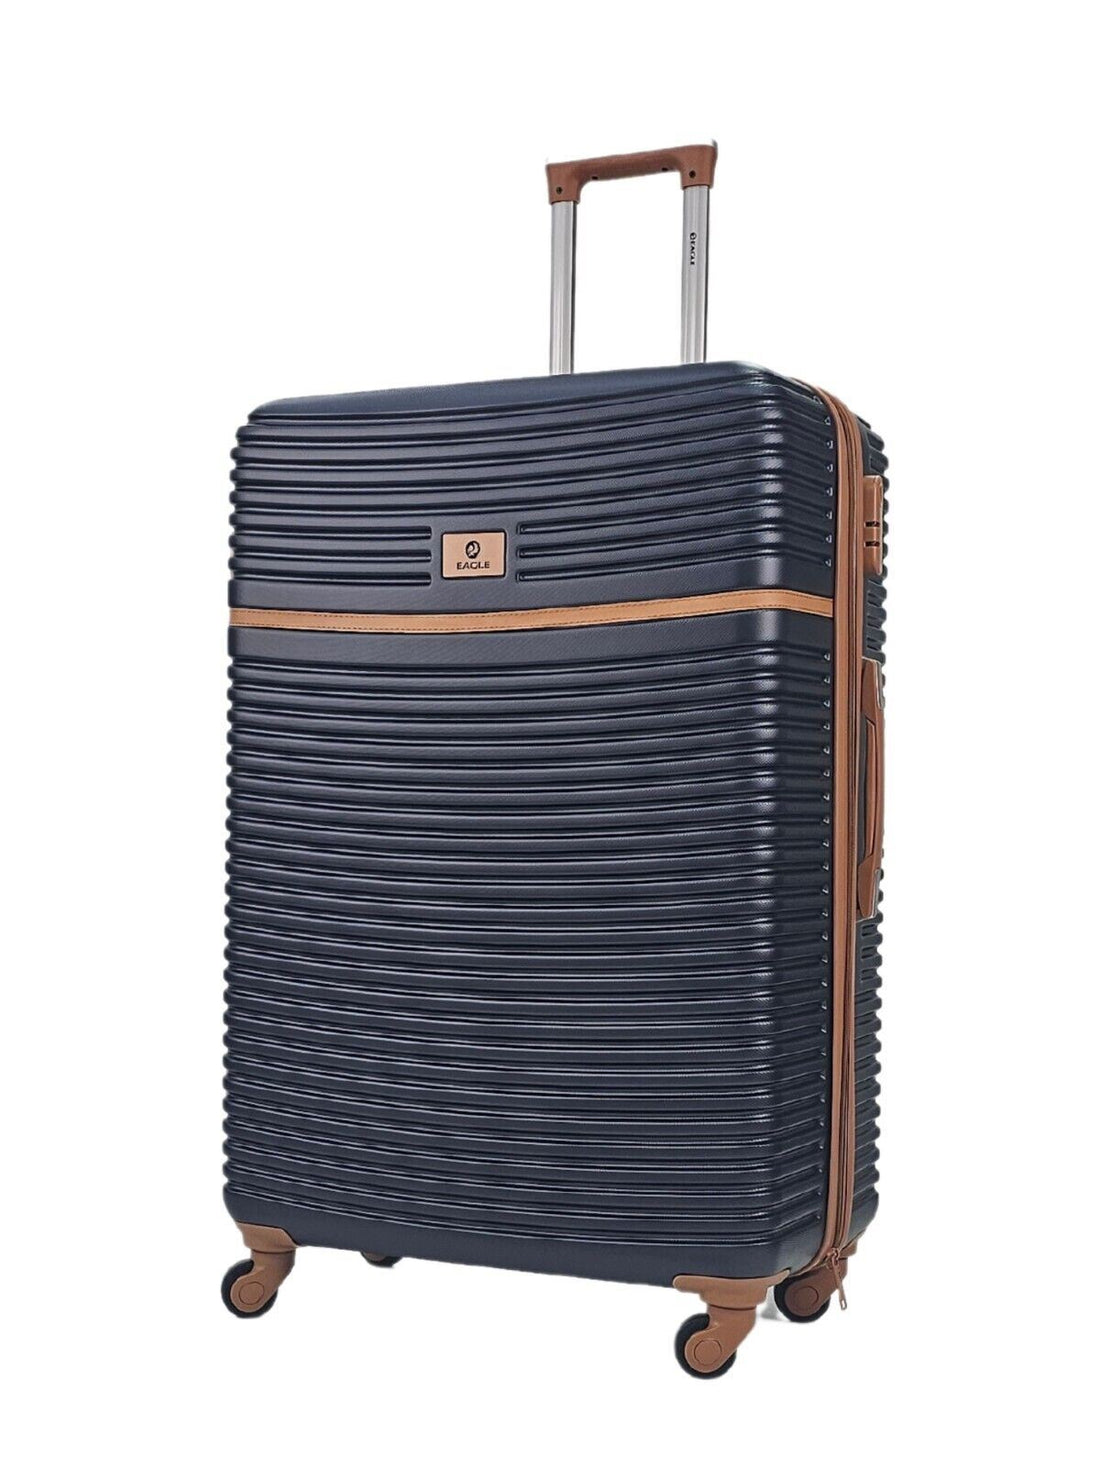 Bridgeport Large Hard Shell Suitcase in Navy